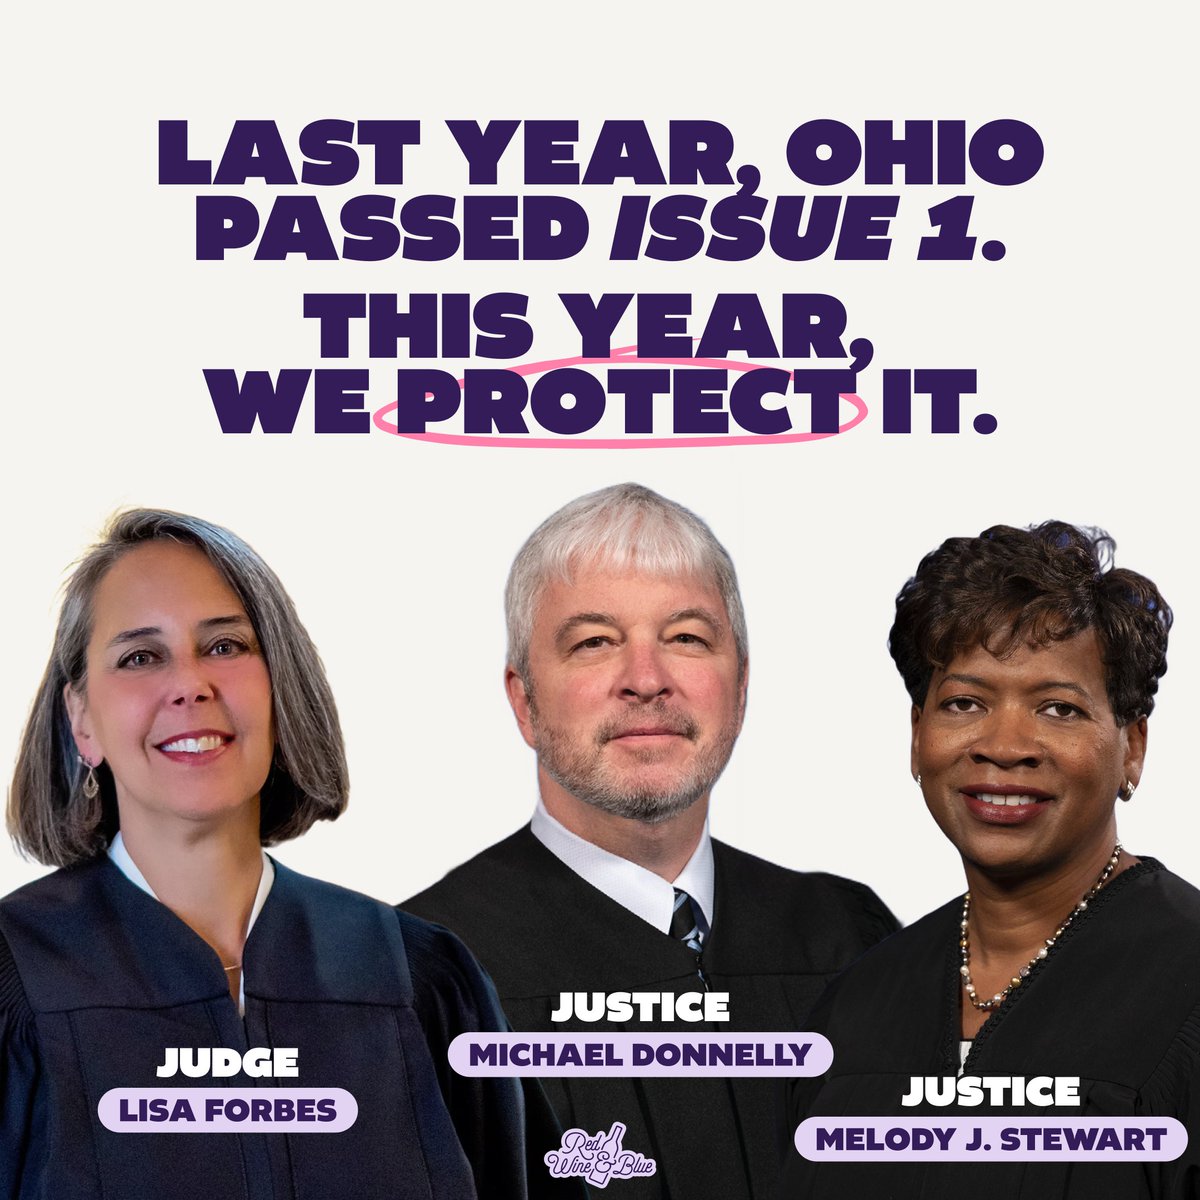 Last year, OH voters enshrined reproductive freedom in our state constitution. This Nov let's protect freedoms like birth control, IVF, miscarriage care, and abortion. We need to elect OH Supreme Court justices who will uphold the rights we value. #ohpol #ohiosupremecourt